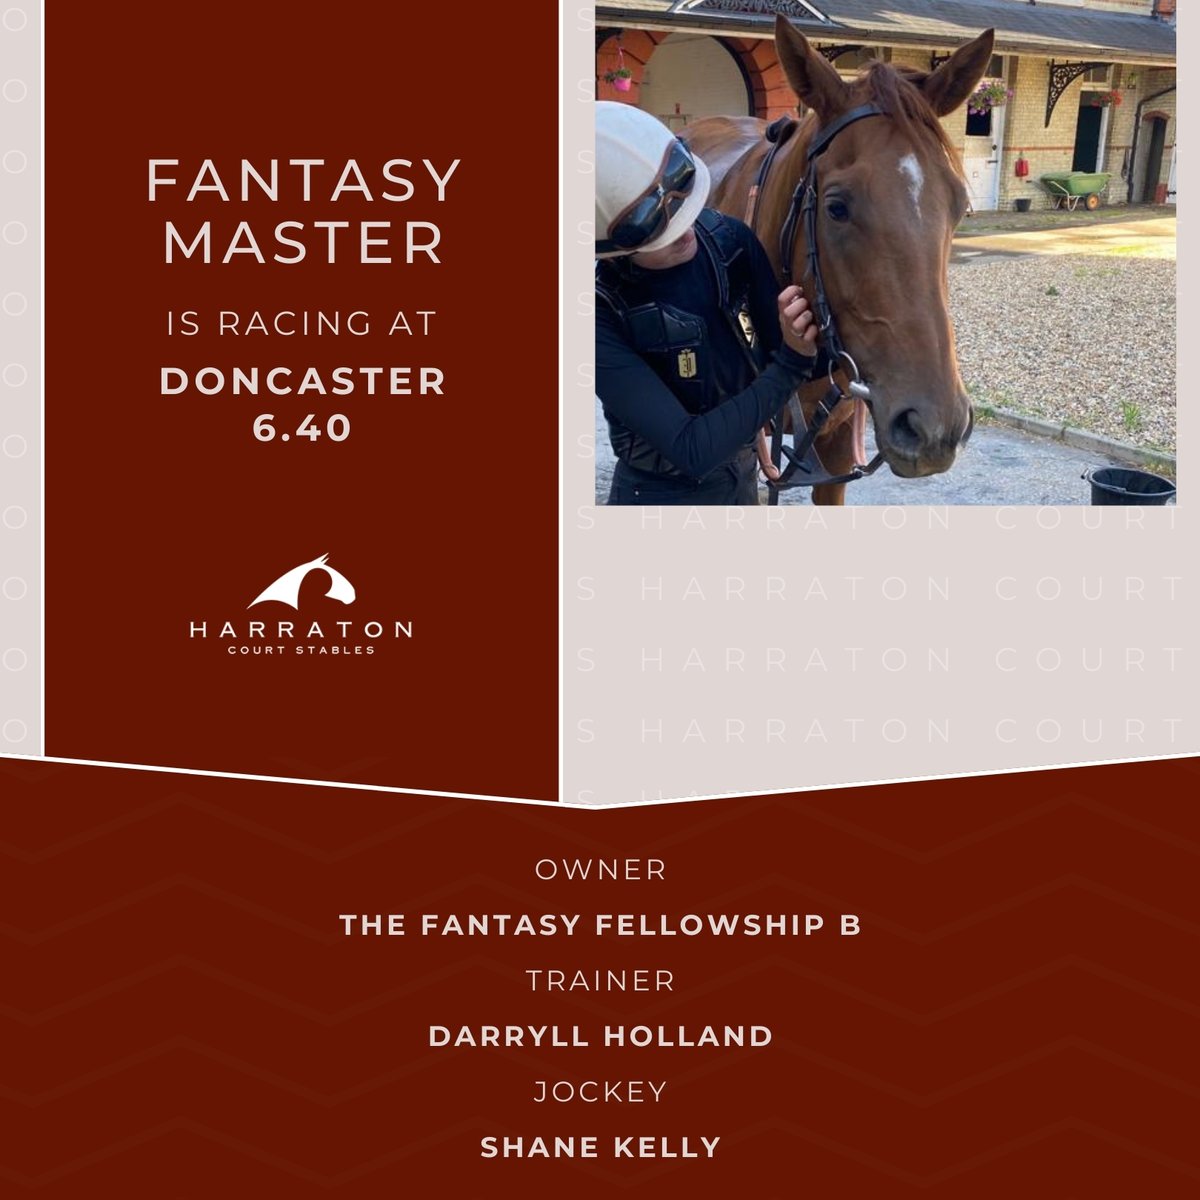 Fantasy Master is racing at Doncaster 6.40 Best of luck to owner The Fantasy Fellowship B, trainer #DarryllHolland and jockey Shane Kelly! #FantasyMaster #Doncaster